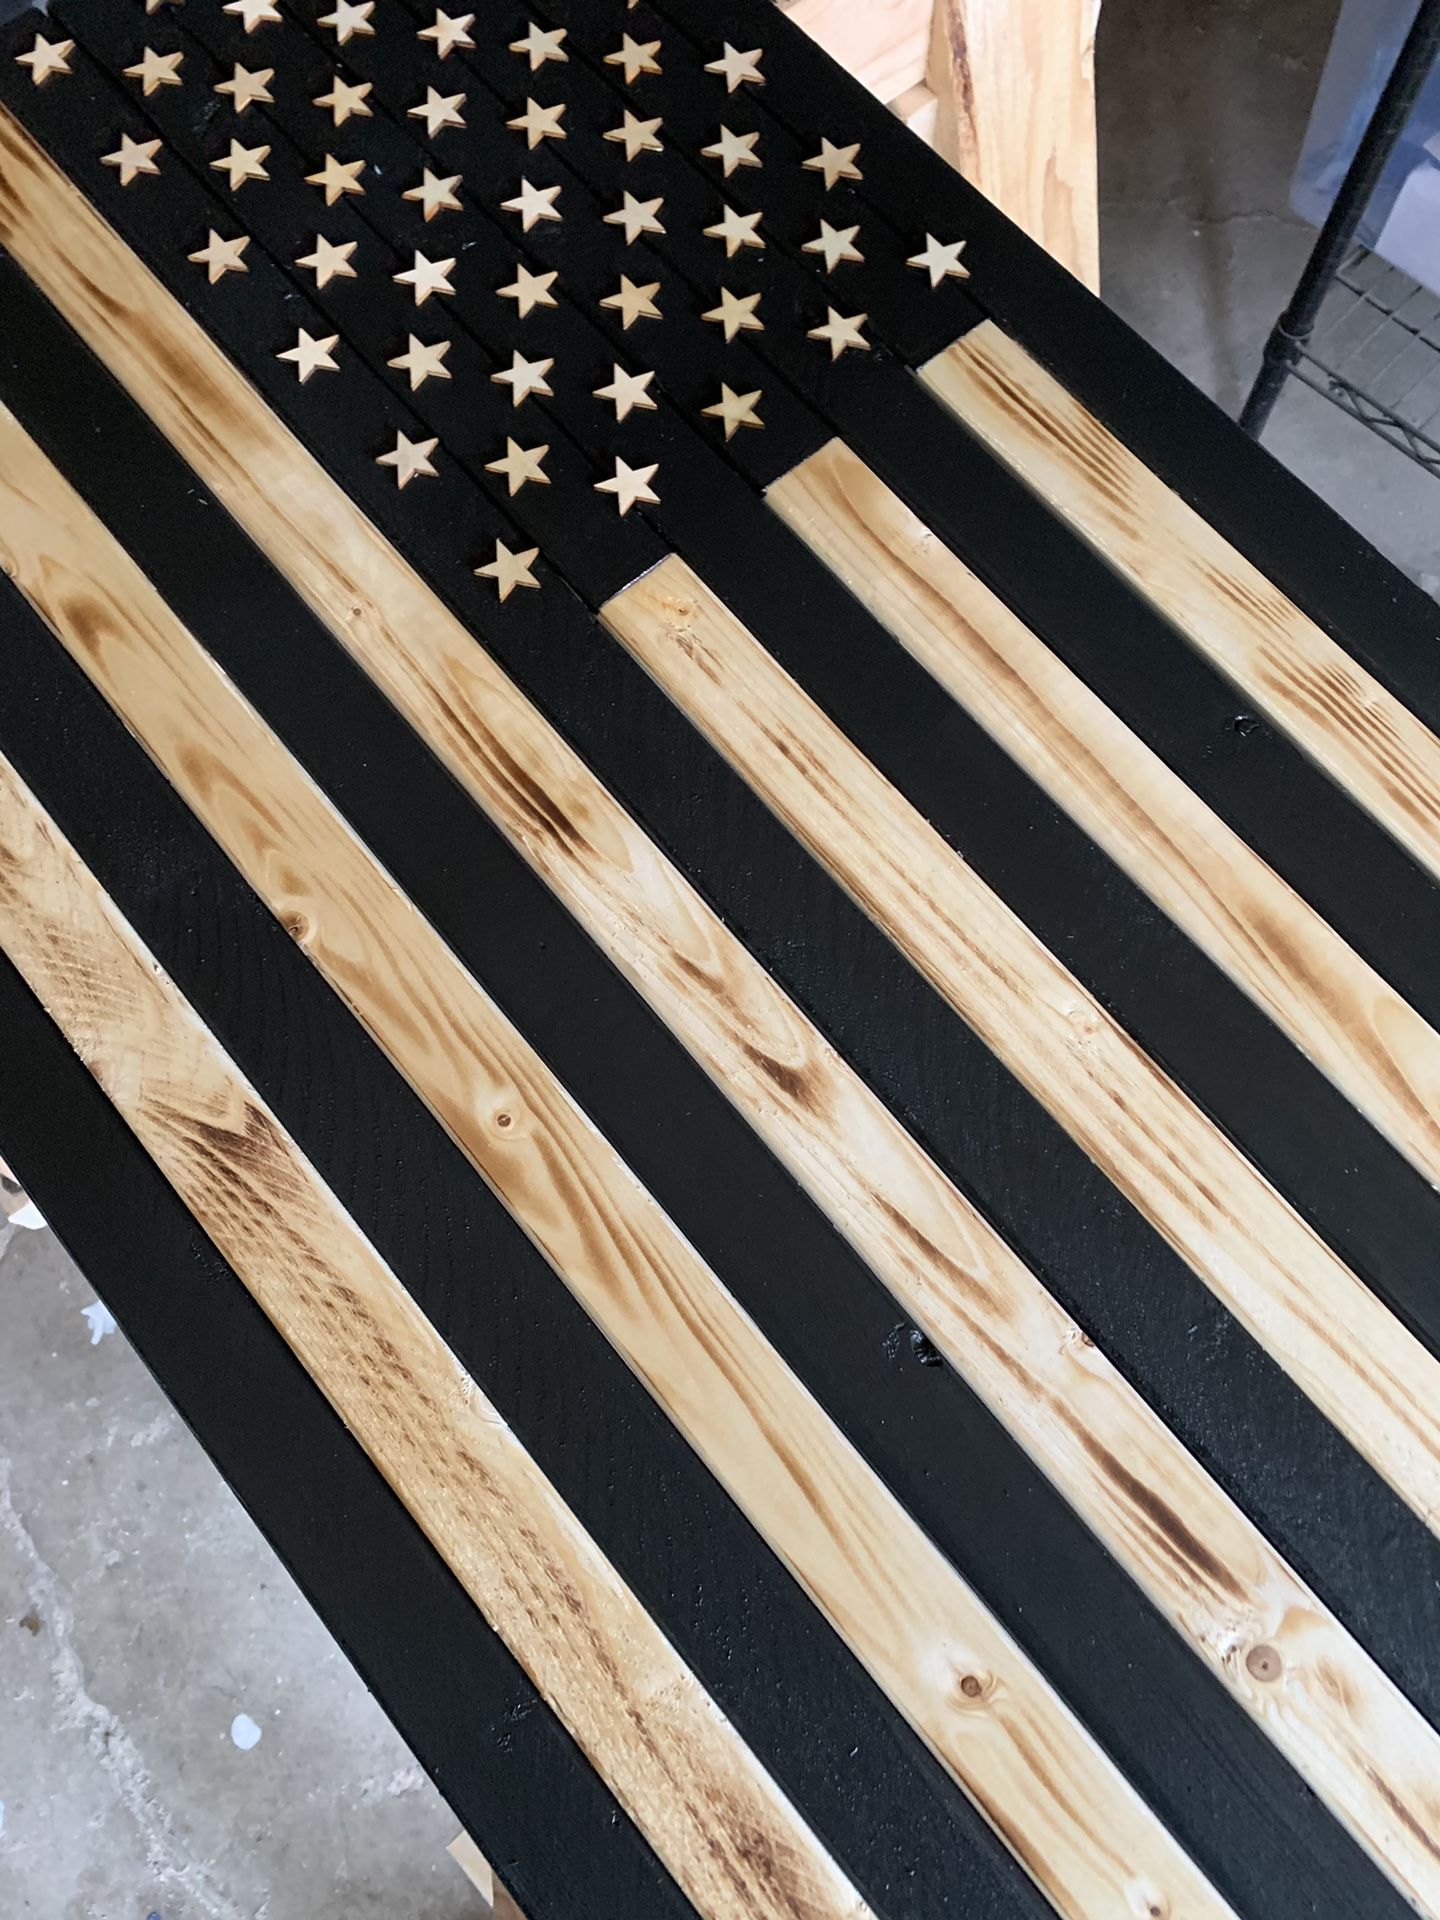 Rustic American Flags 🇺🇸 Large 37” x 20” Handcrafted in Oregon